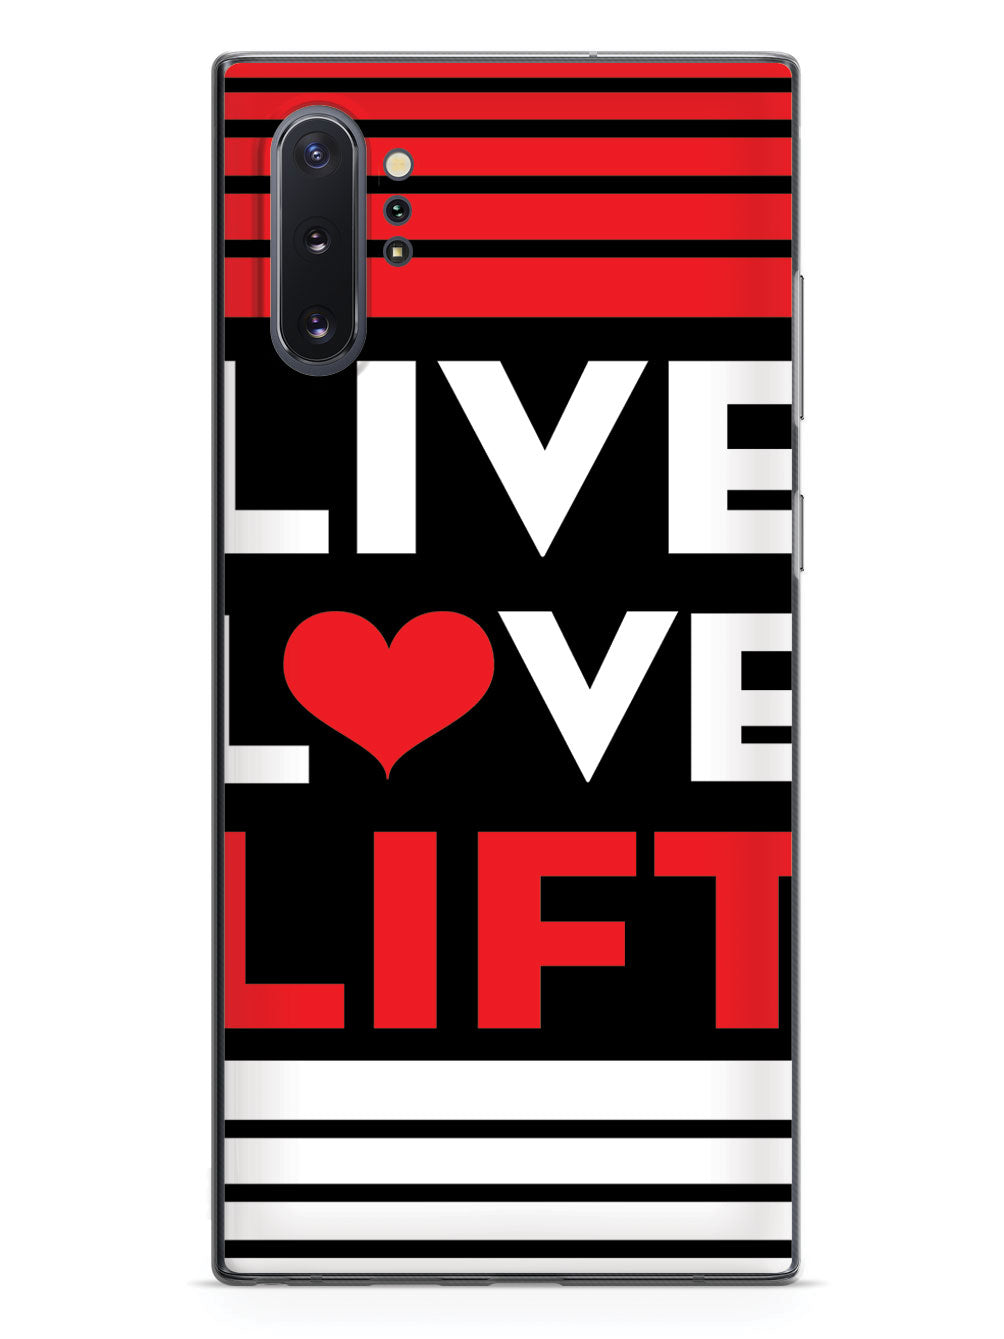 Live, Love, Lift Working Out Gym Case